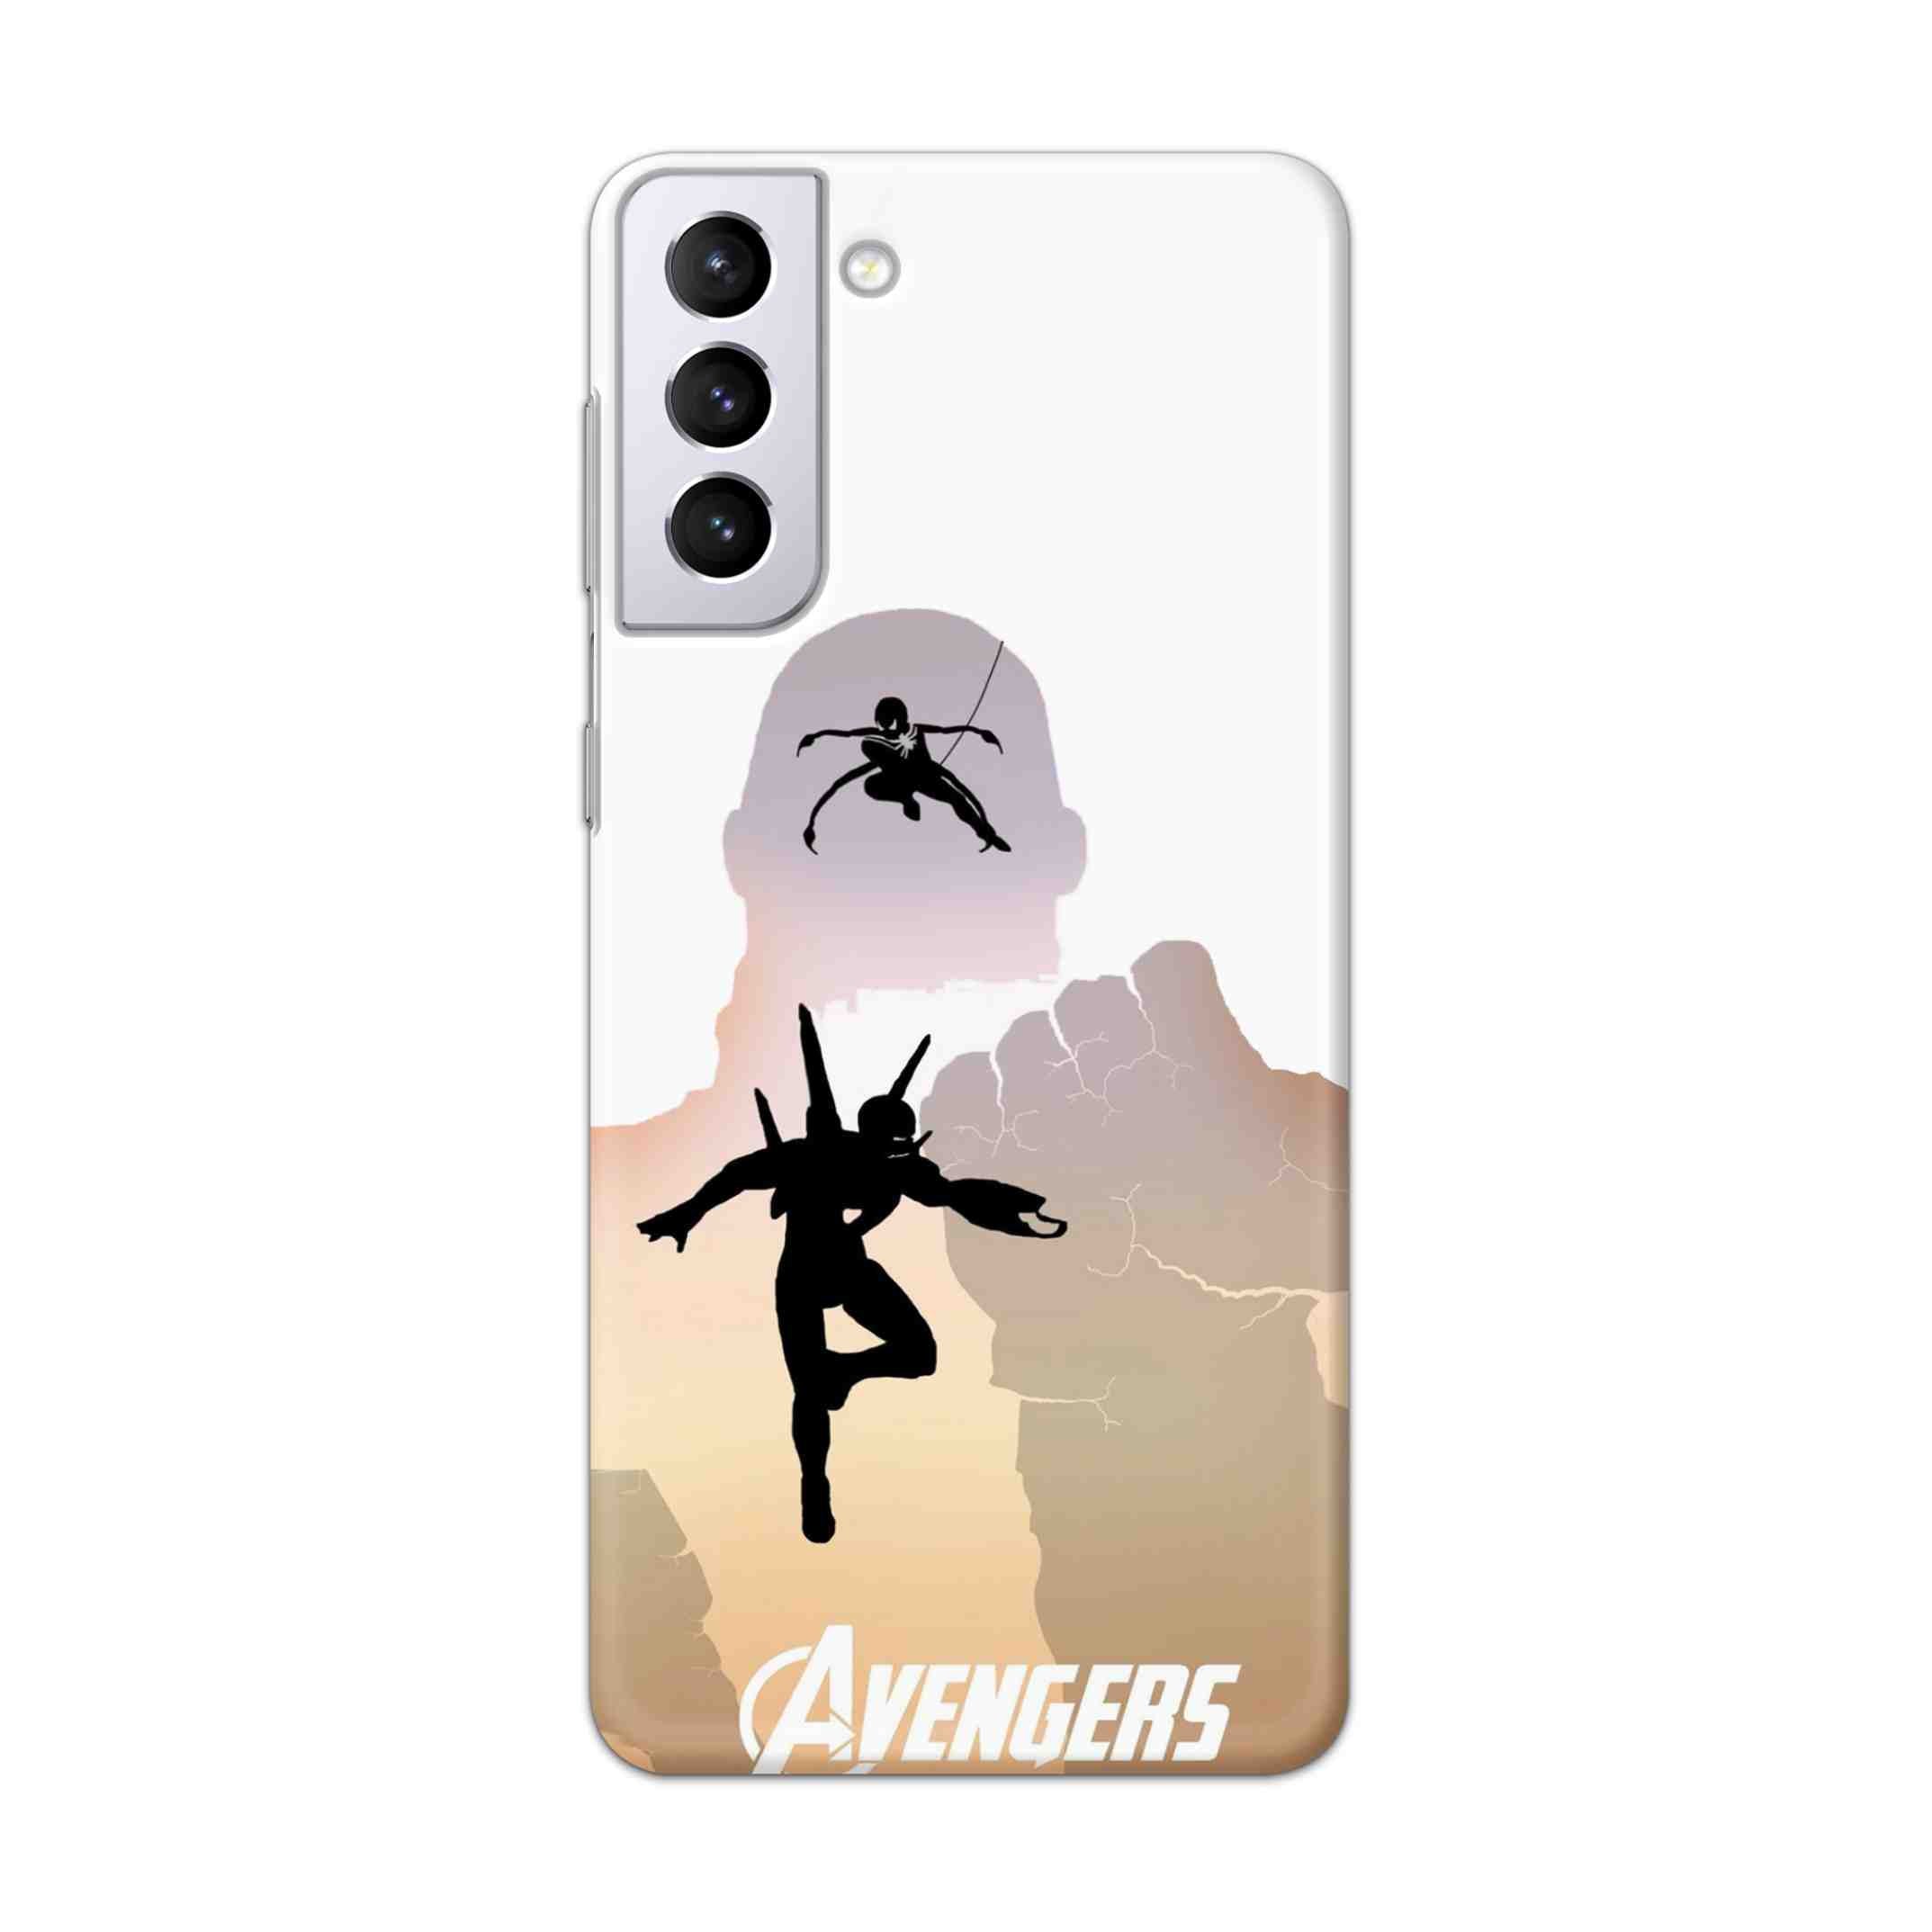 Buy Iron Man Vs Spiderman Hard Back Mobile Phone Case Cover For Samsung Galaxy S21 Plus Online